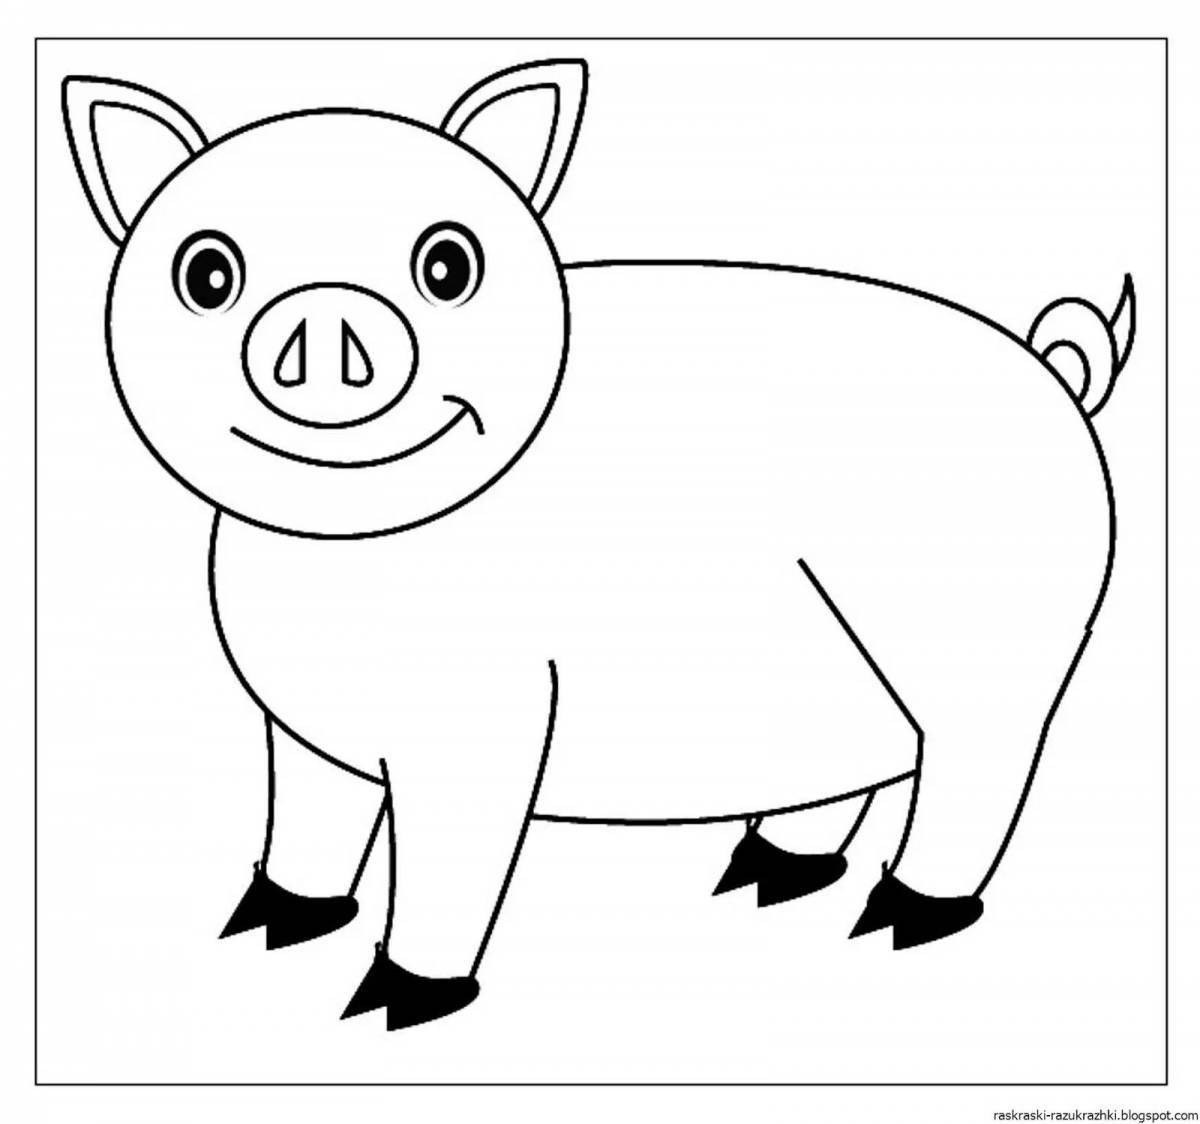 Tiny mini pig coloring page